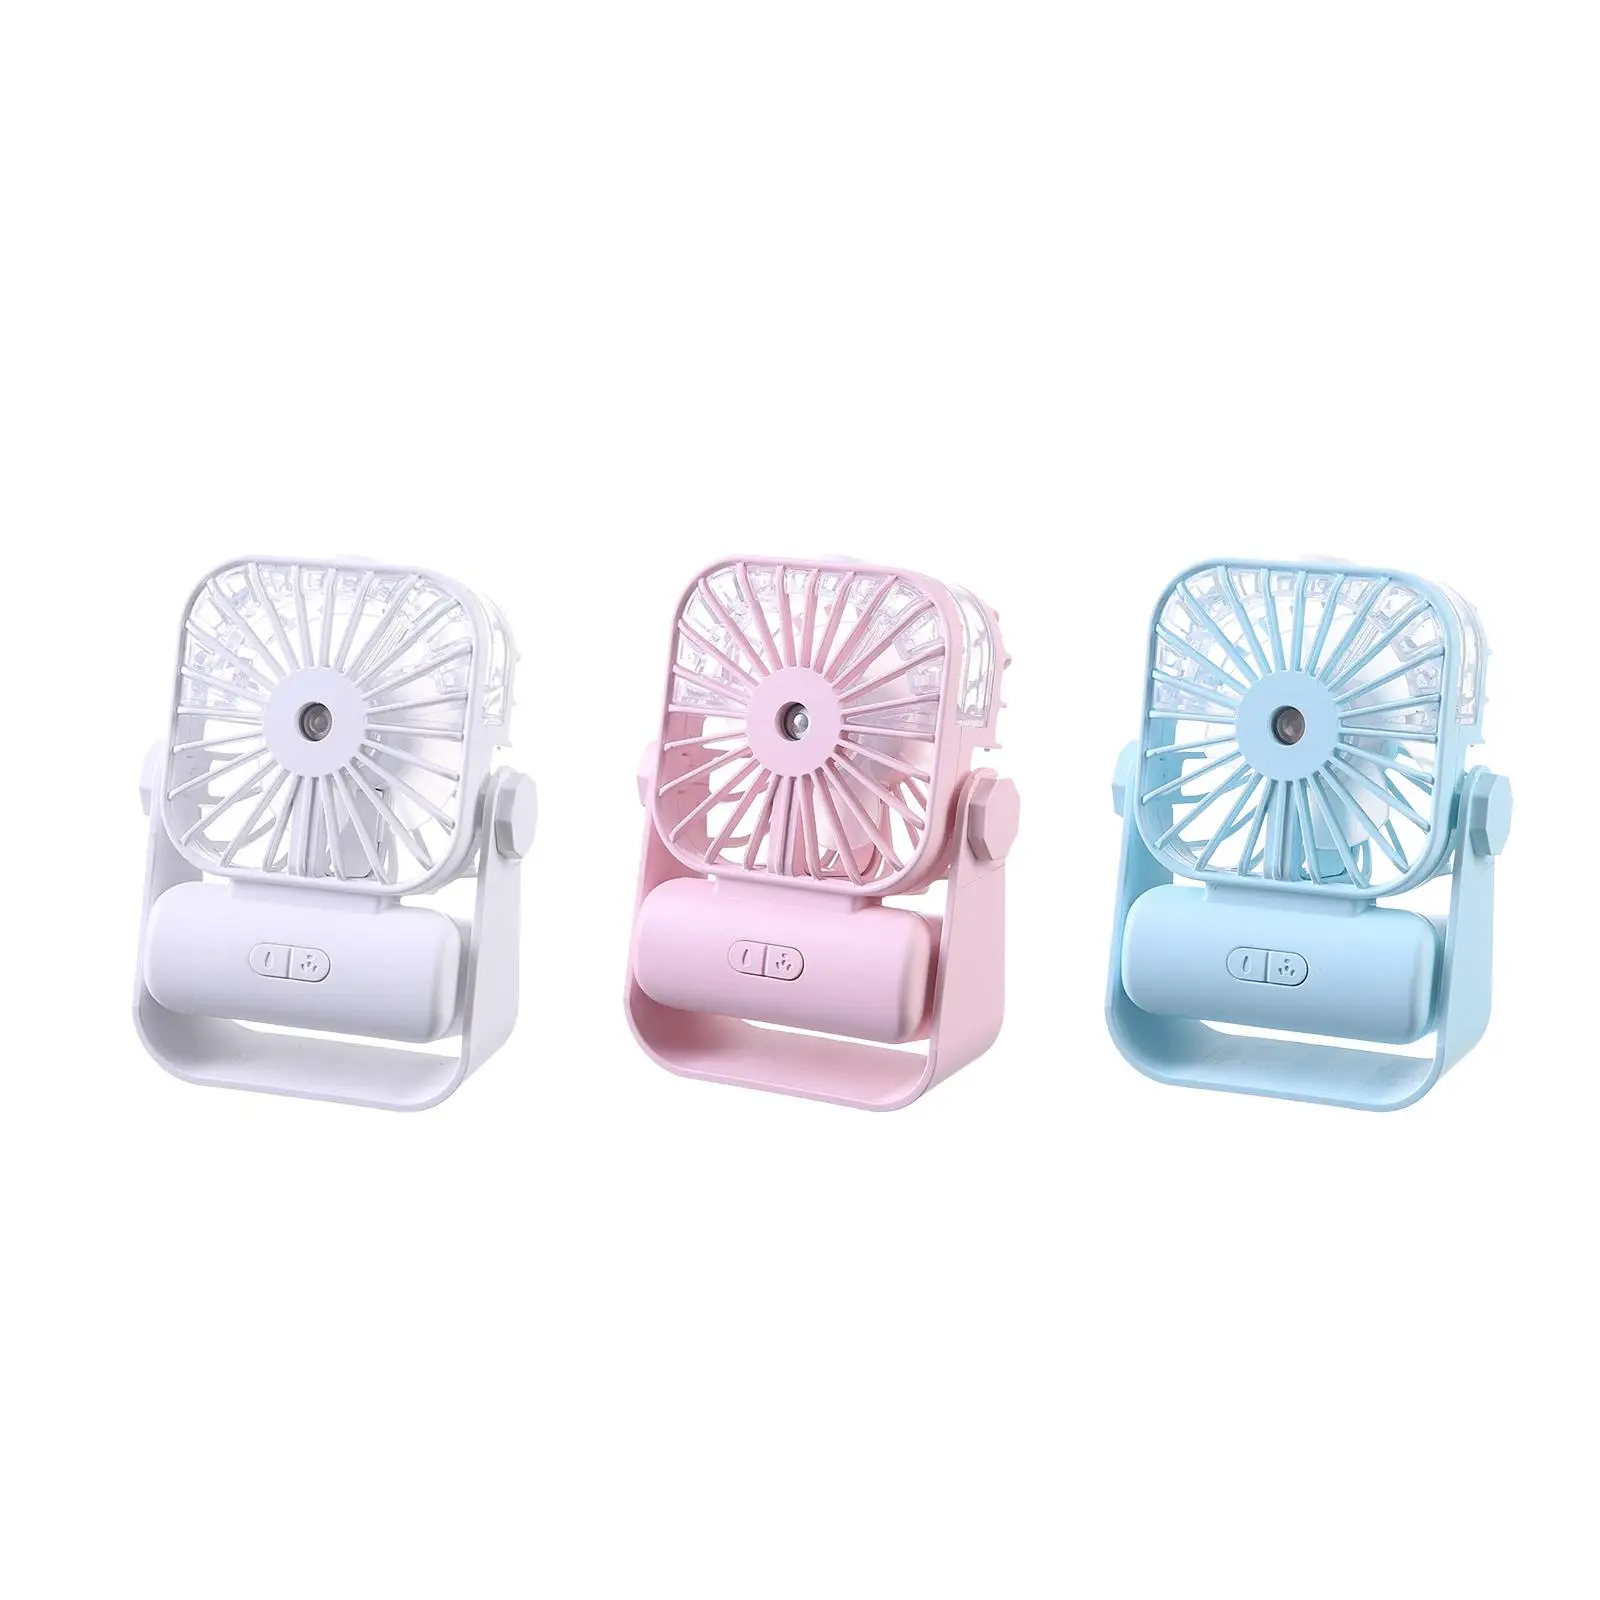 Quiet Camping Fan Two Speeds Spray Mini Spray Fan Personal Table small fan Desk Fan for Home Office Travel Hiking Camping Indoor